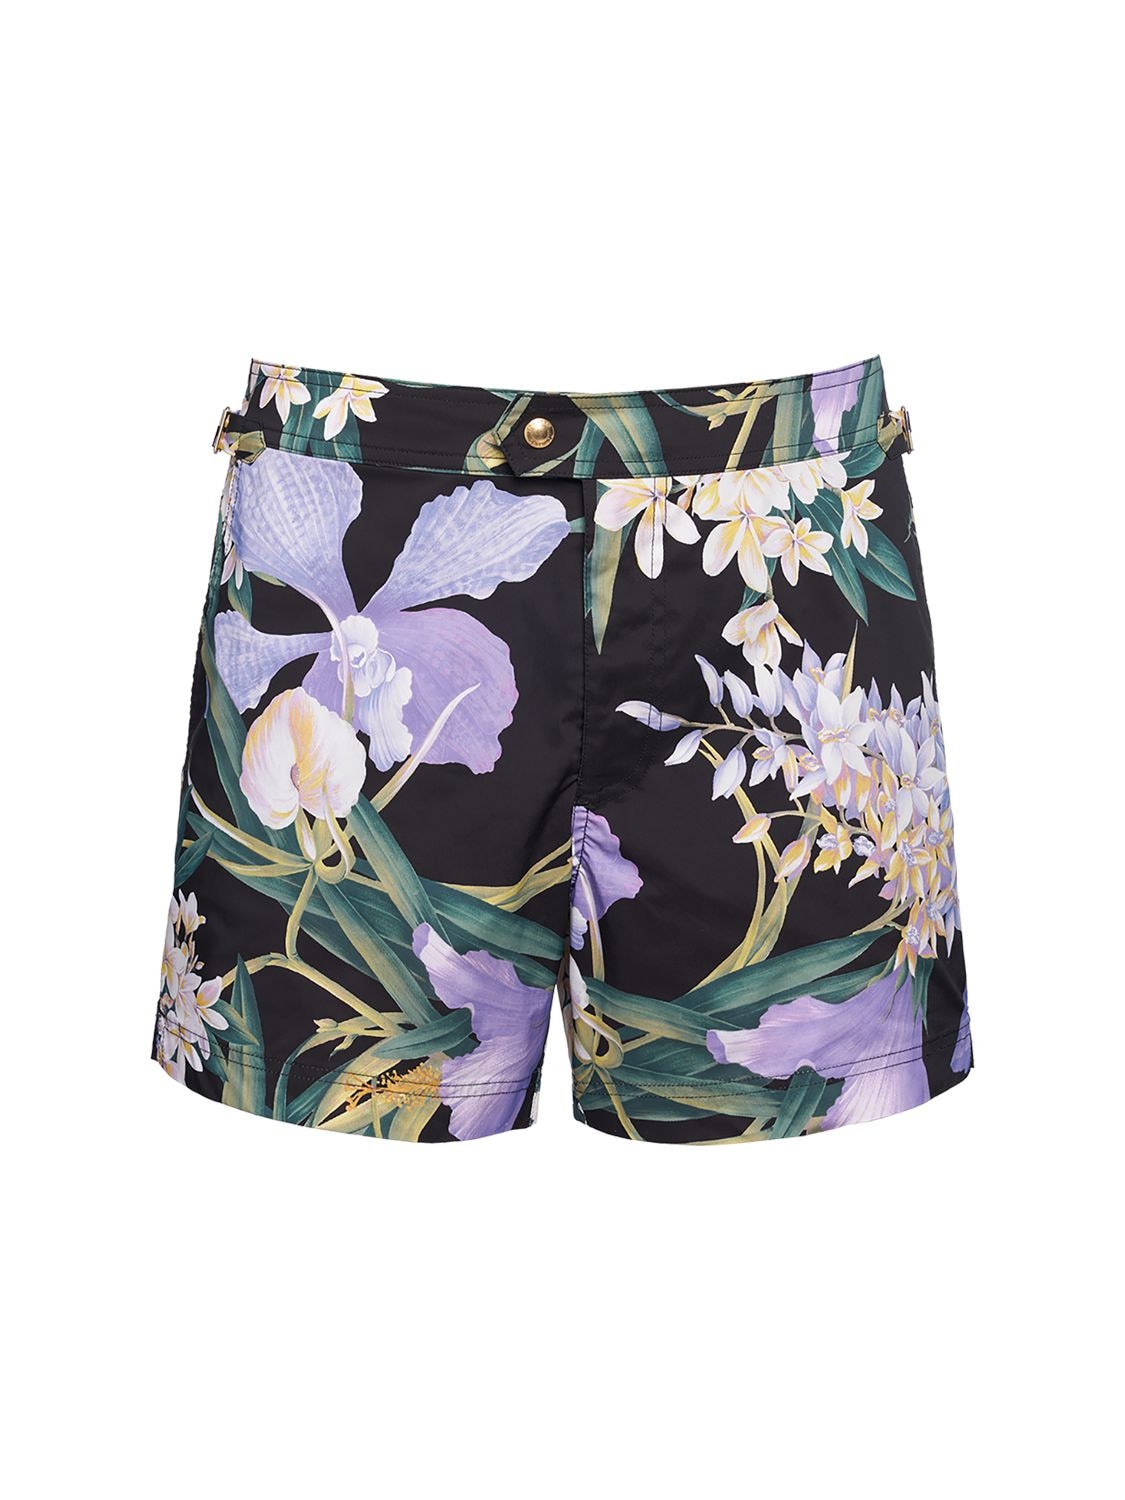 TOM FORD BOLD ORCHID SWIM SHORTS